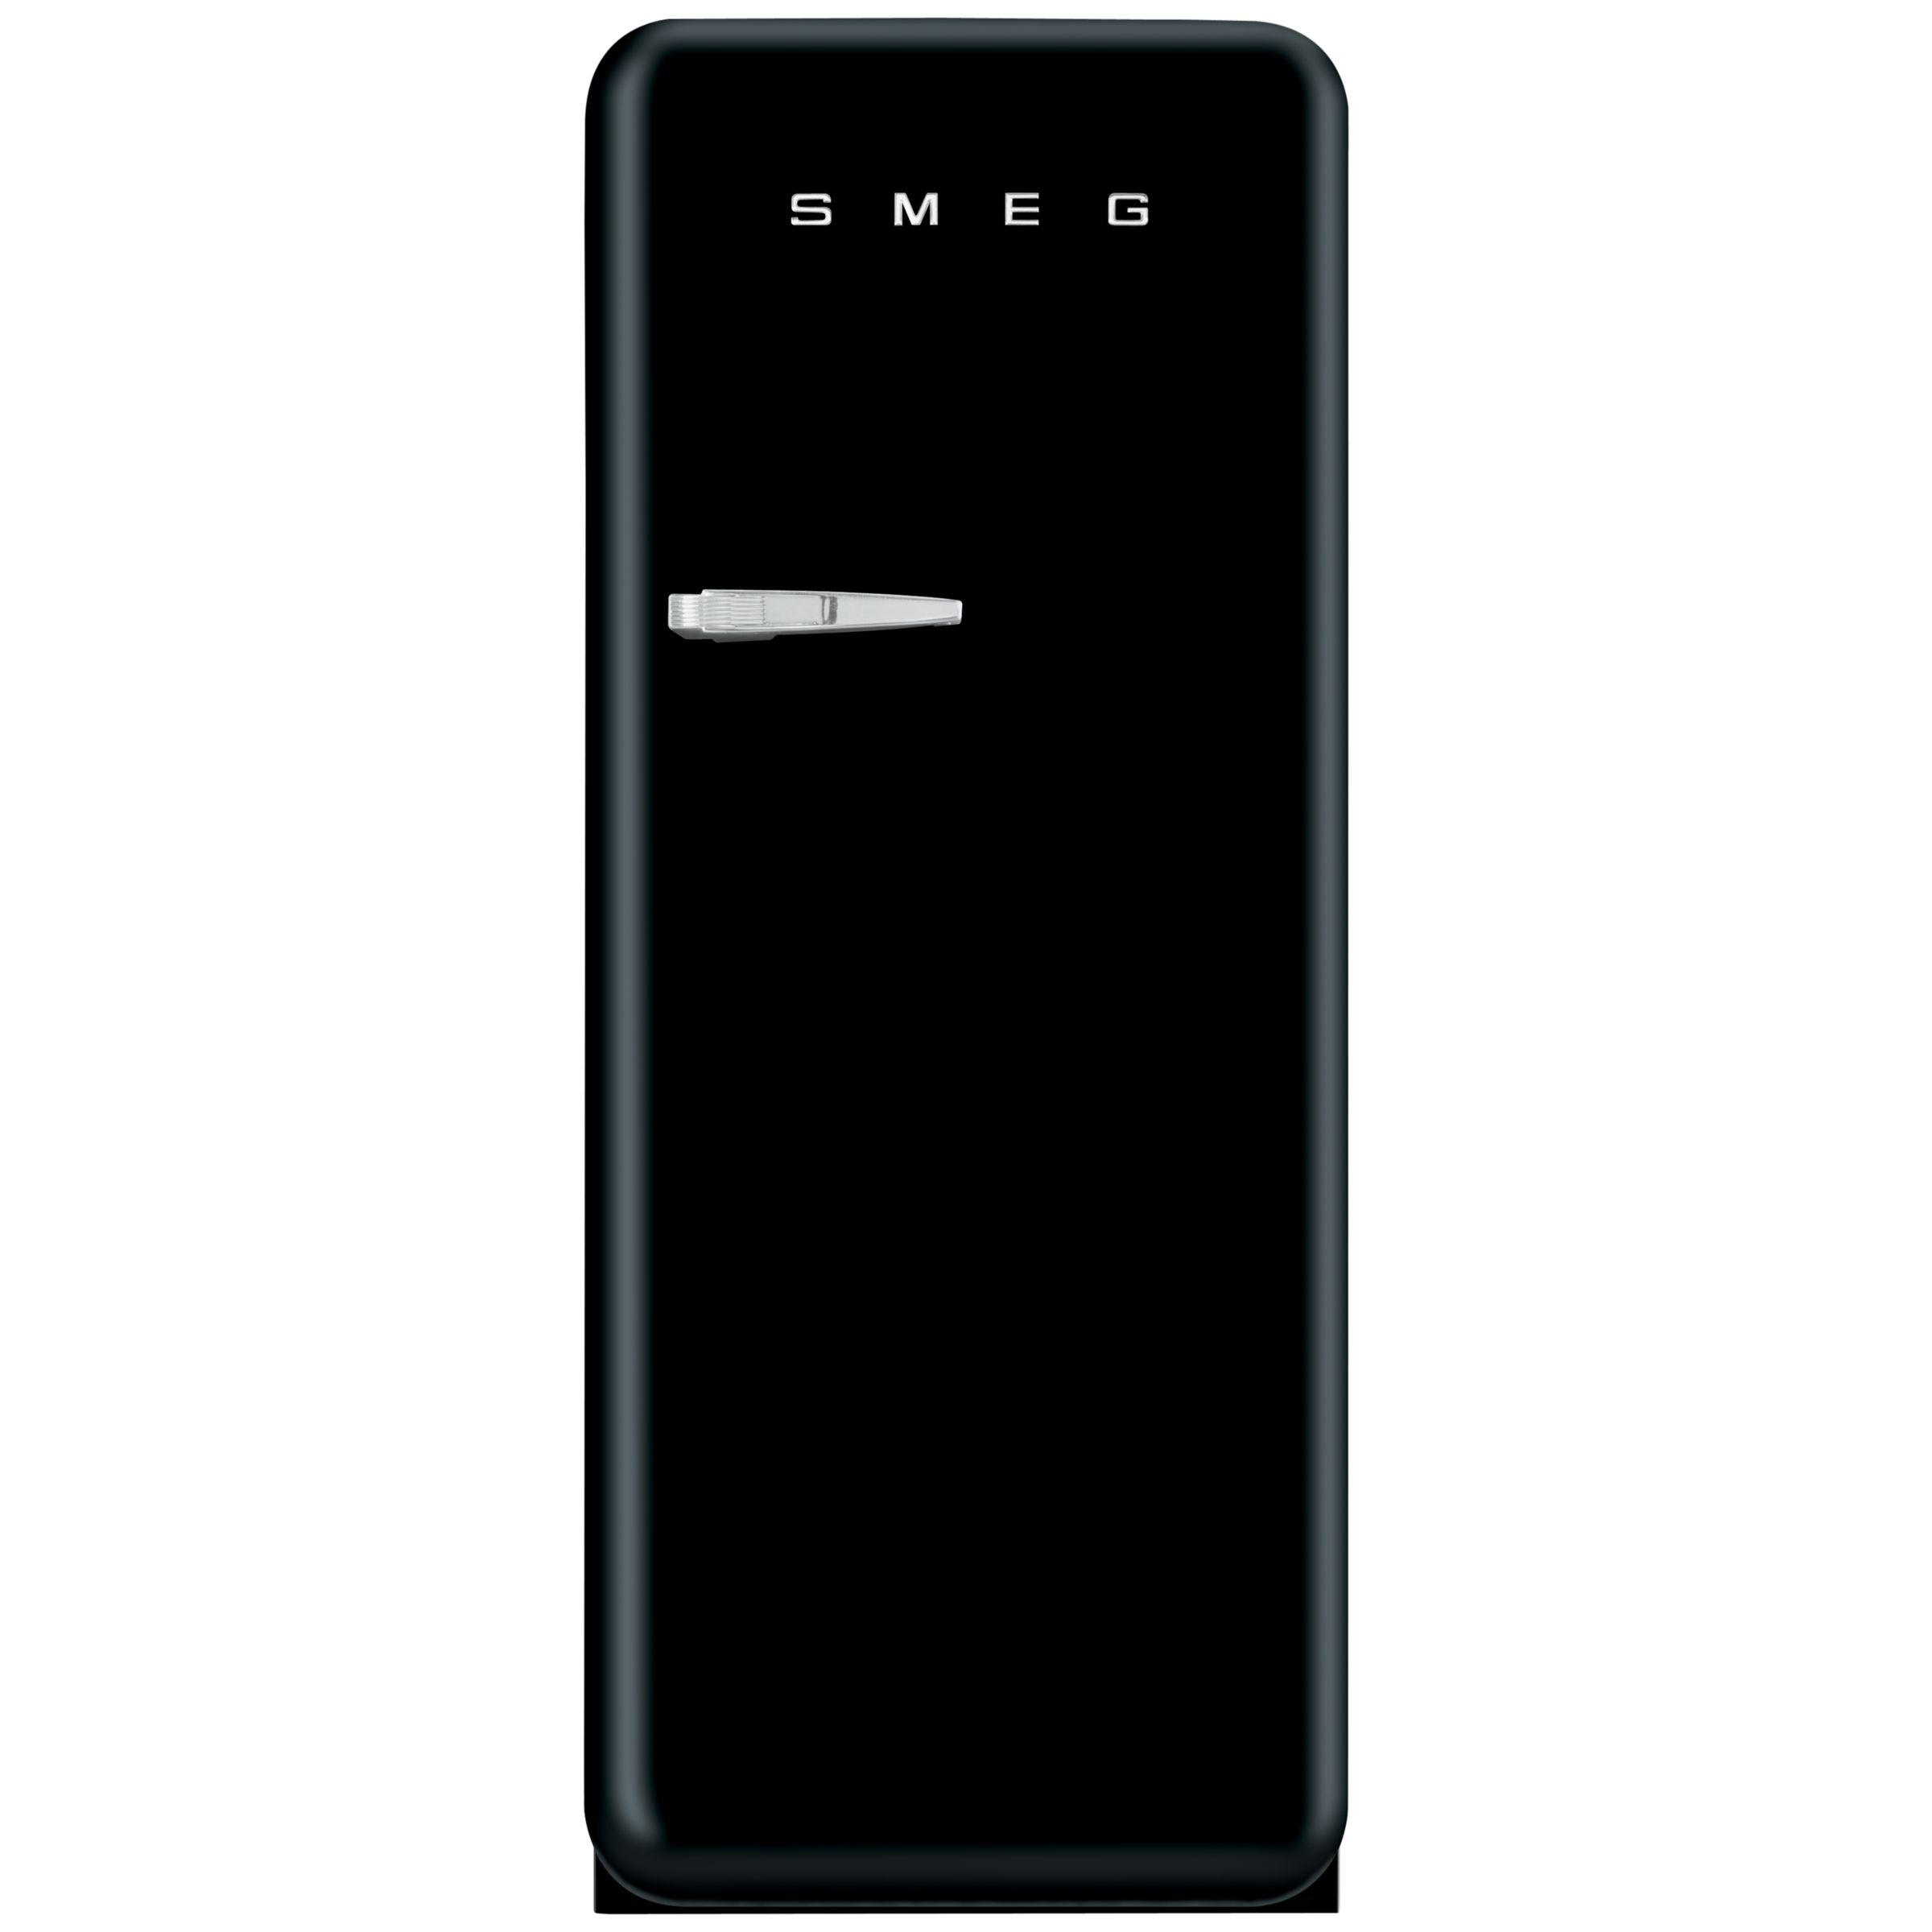 Smeg FAB28Q Fridge with Freezer Compartment, A++ Energy Rating, 60cm Wide, Right-Hand Hinge